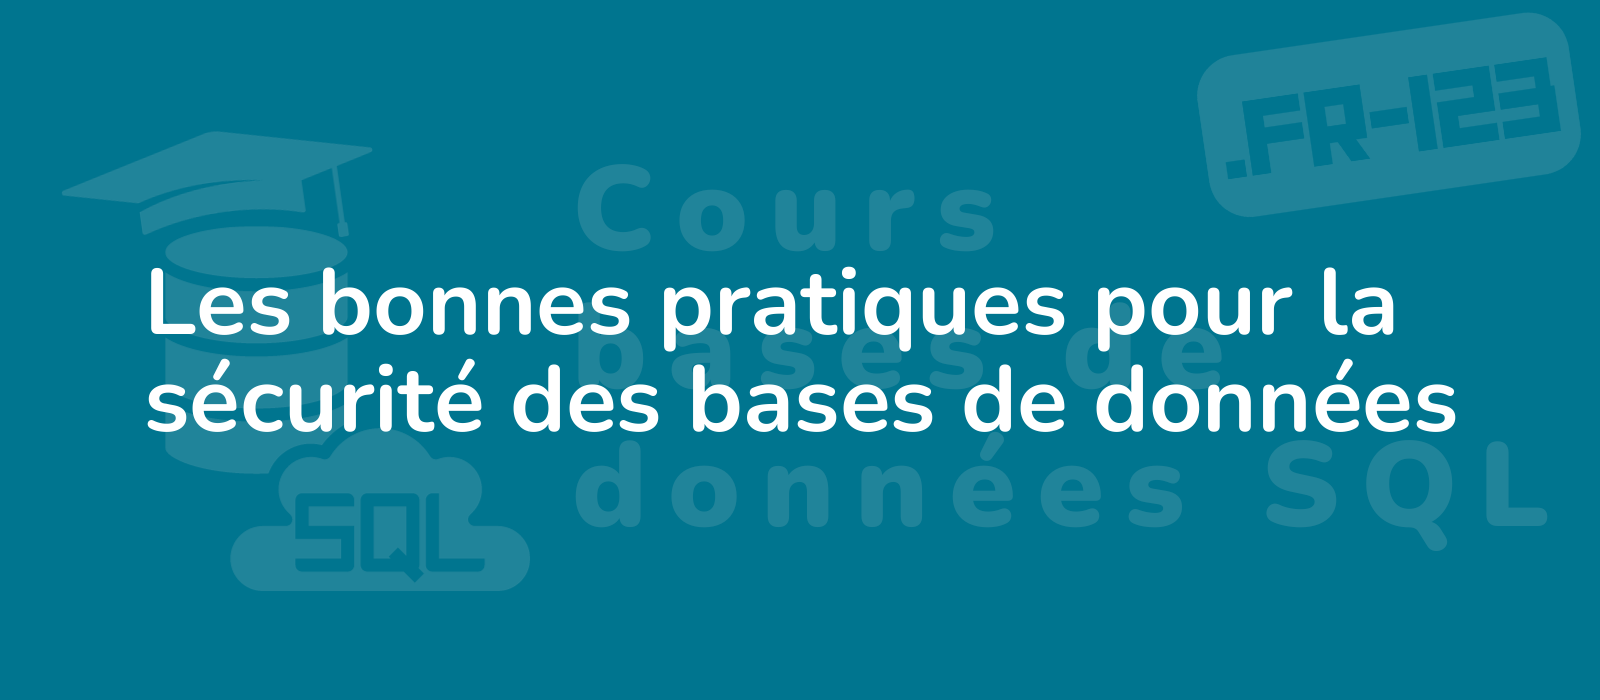 the representative image for the title les bonnes pratiques pour la securite des bases de donnees could be described as professional with a security shield symbol protecting database servers on a blue background representing database security best practic